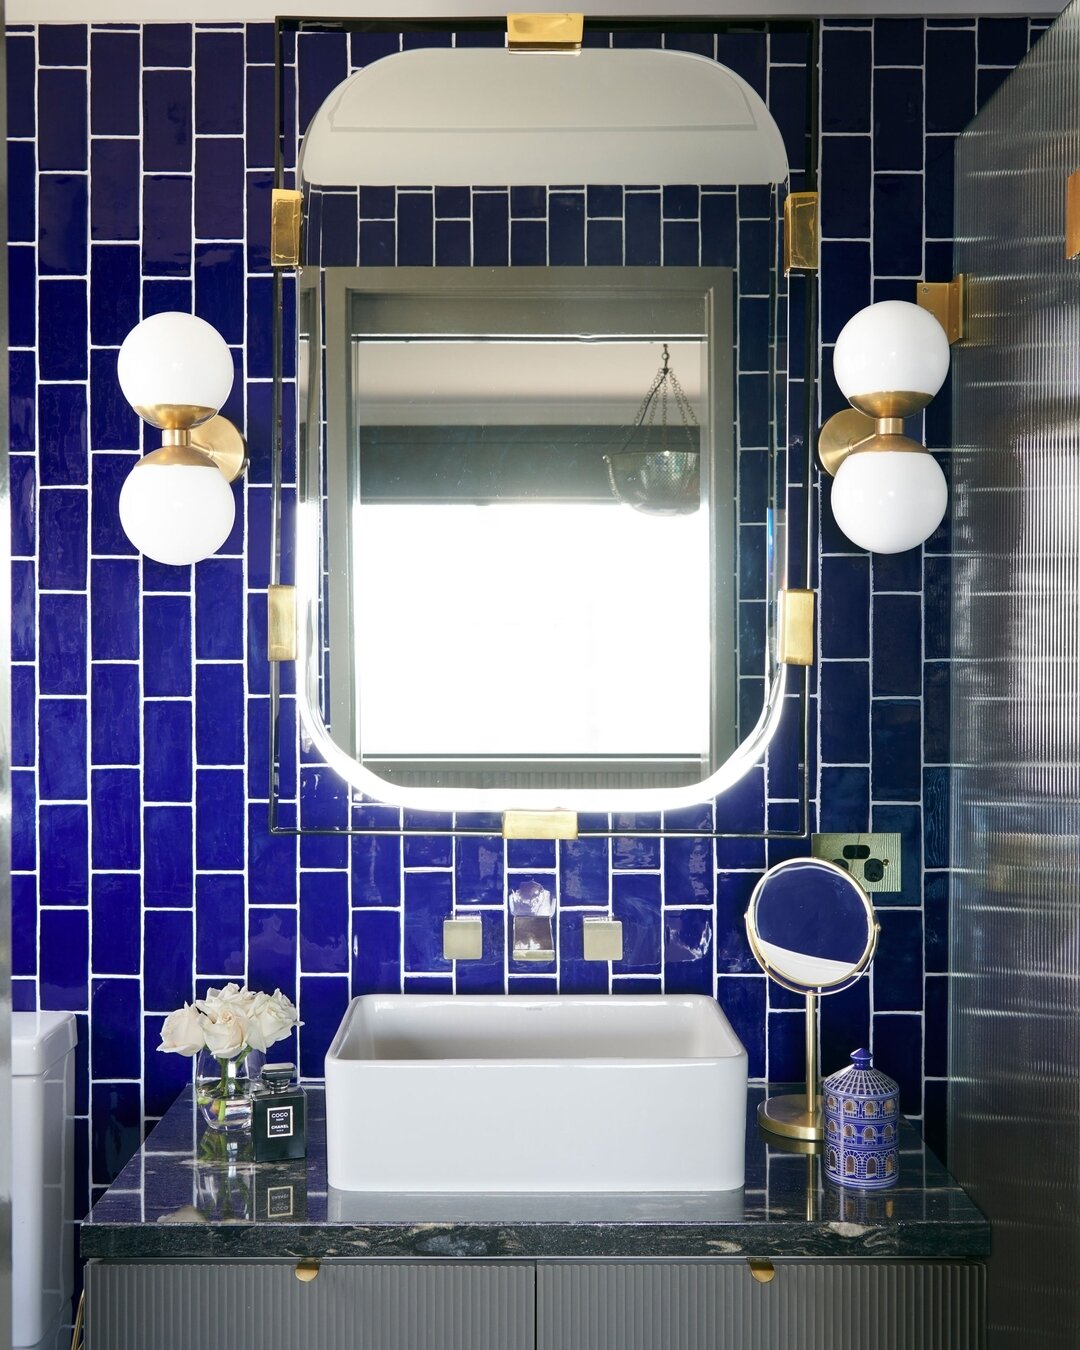 PORT STEPHENS HOUSE I - Cobalt wall tiles create a bold and captivating backdrop, infusing the space with a vibrant energy. A brass and iron mirror adds a touch of elegance with quartzite benchtops below. Statement wall lights provide both ambient an